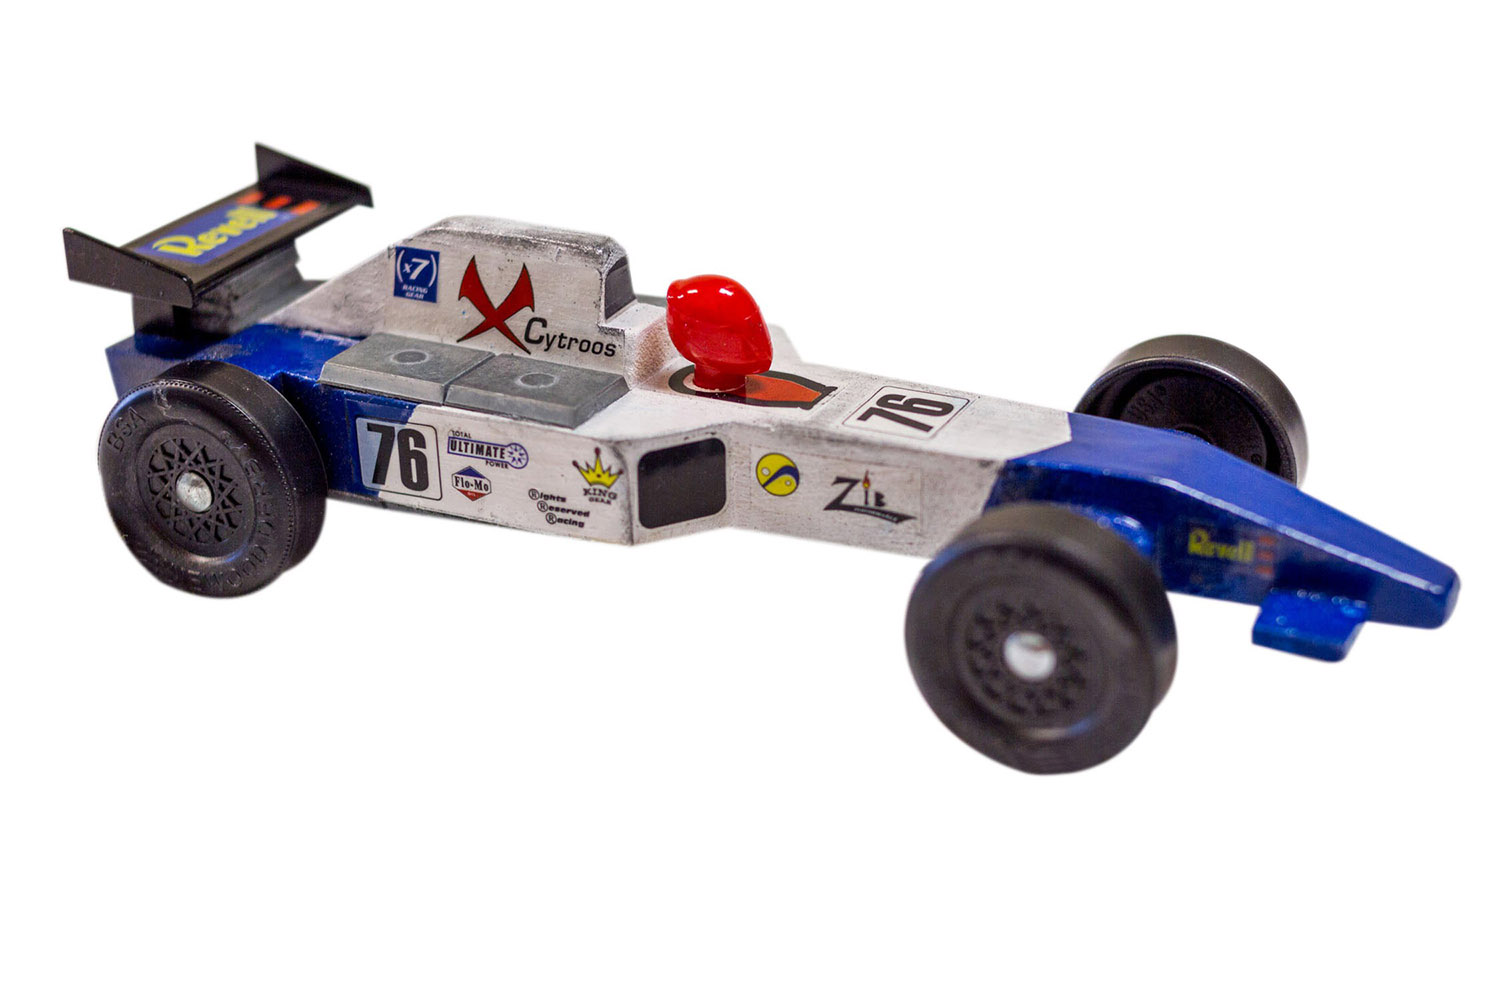 Paint a Pinewood Derby Car with Testors